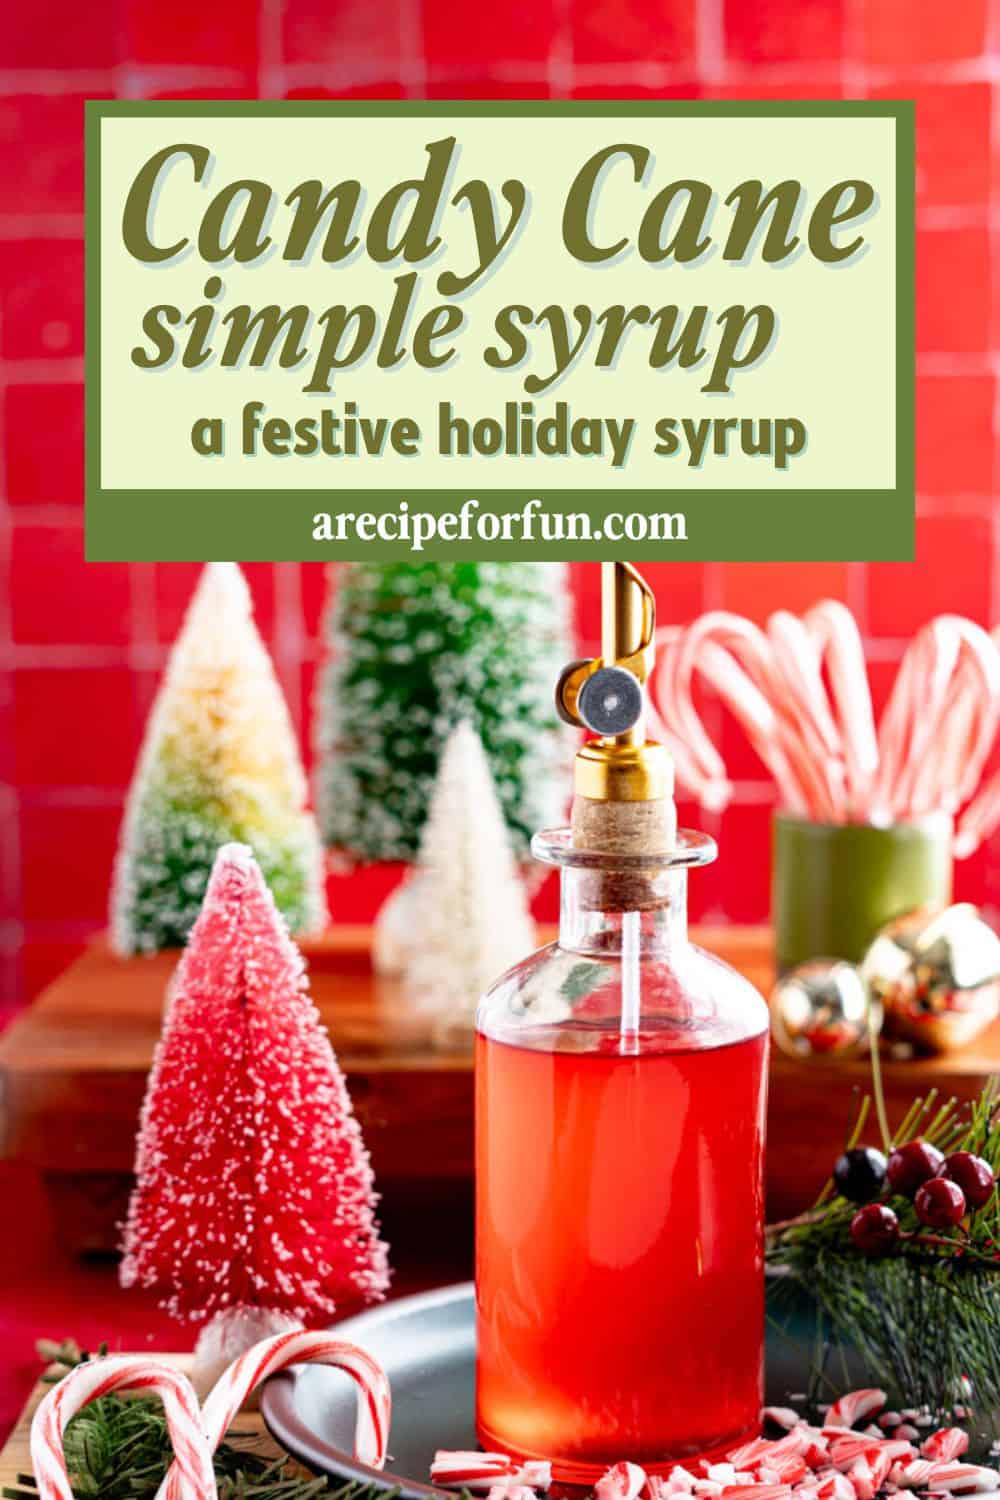 Pinterest Pin for a post about a recipe for a candy cane simple syrup.